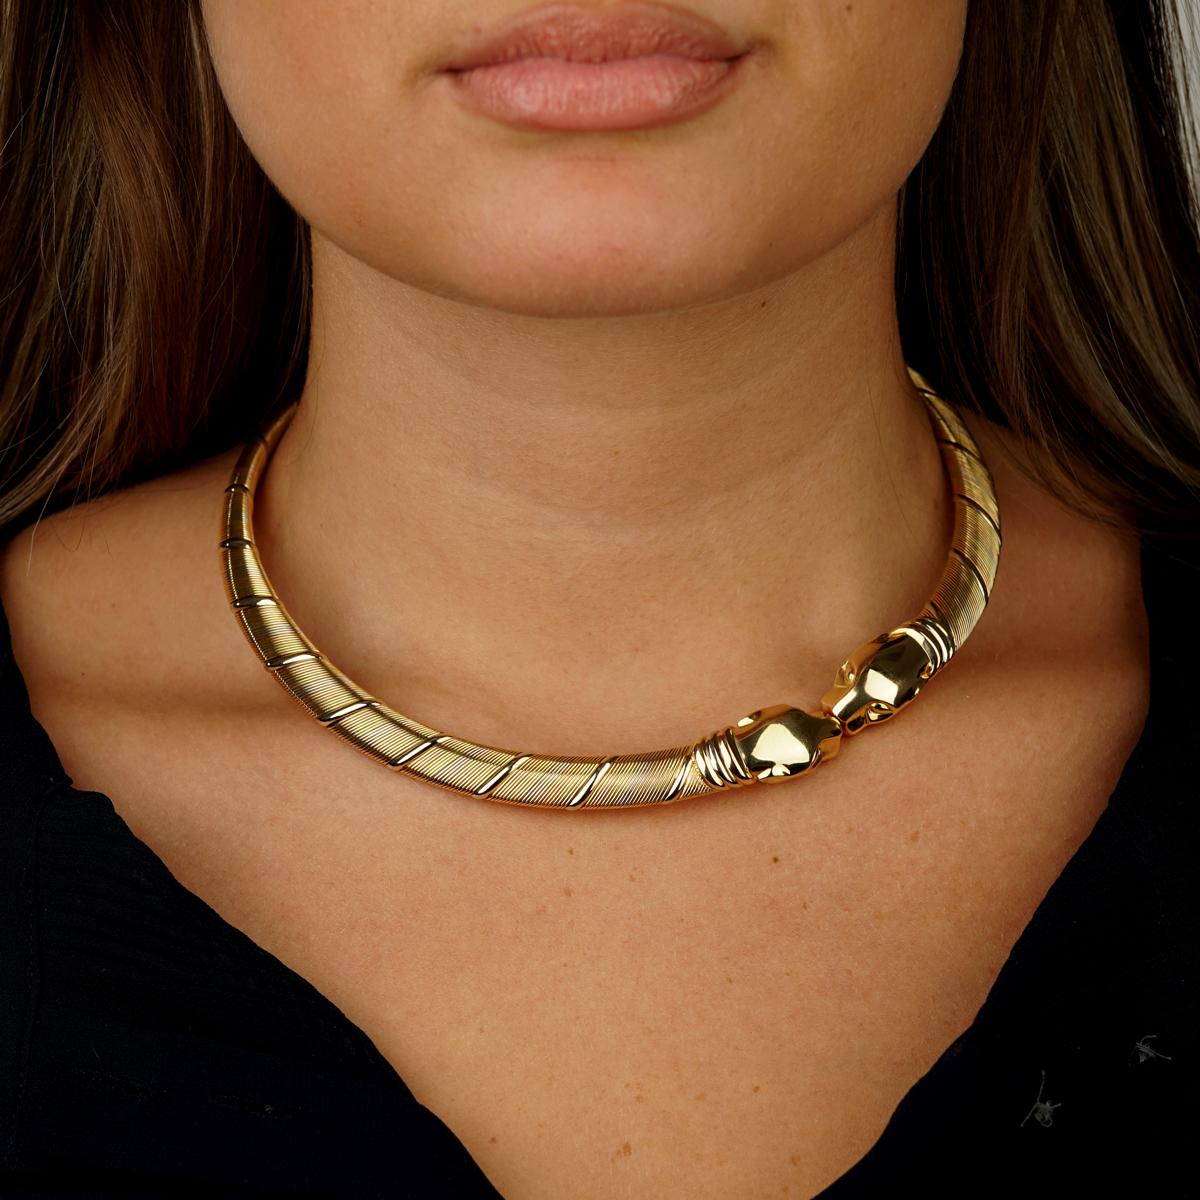 Introducing the Cartier Panthere 18k Gold Choker Necklace from the 1990s – a vintage treasure that embodies the essence of luxury and sophistication, while capturing the iconic spirit of Cartier's legendary Panthere collection. This striking choker